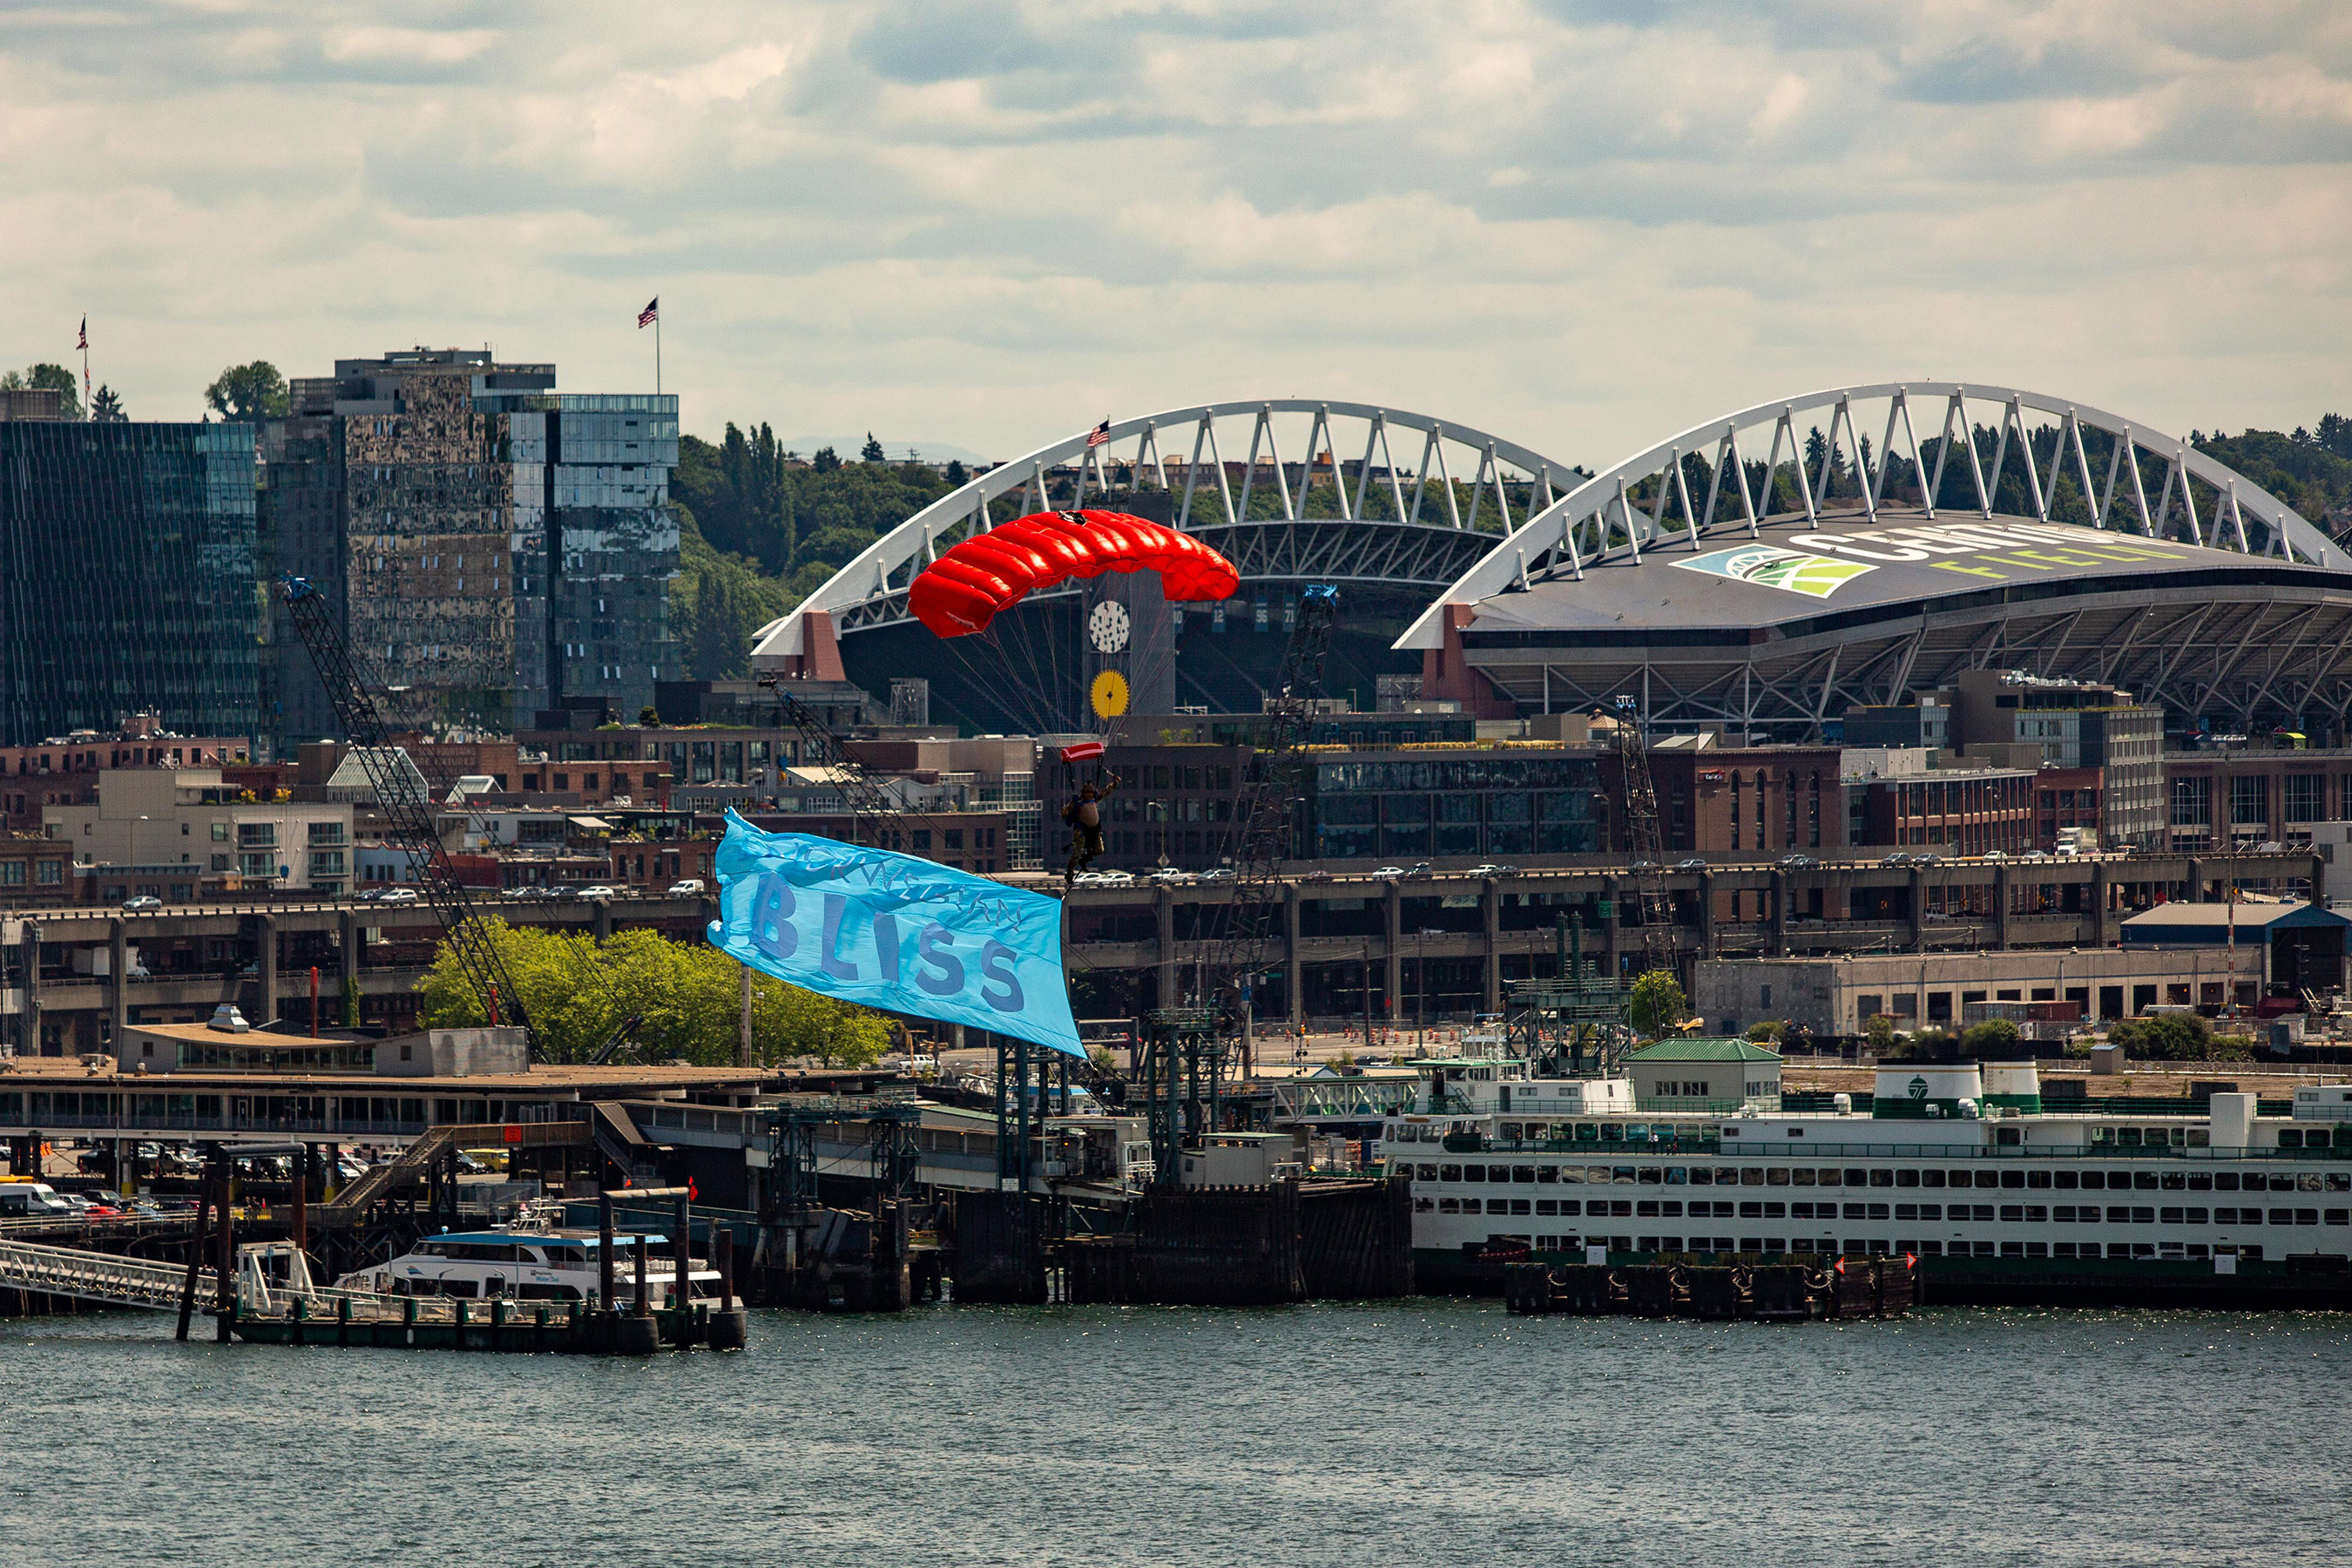 In celebration of Norwegian Bliss’ christening, skydivers descend over the ship in Seattle, Washington